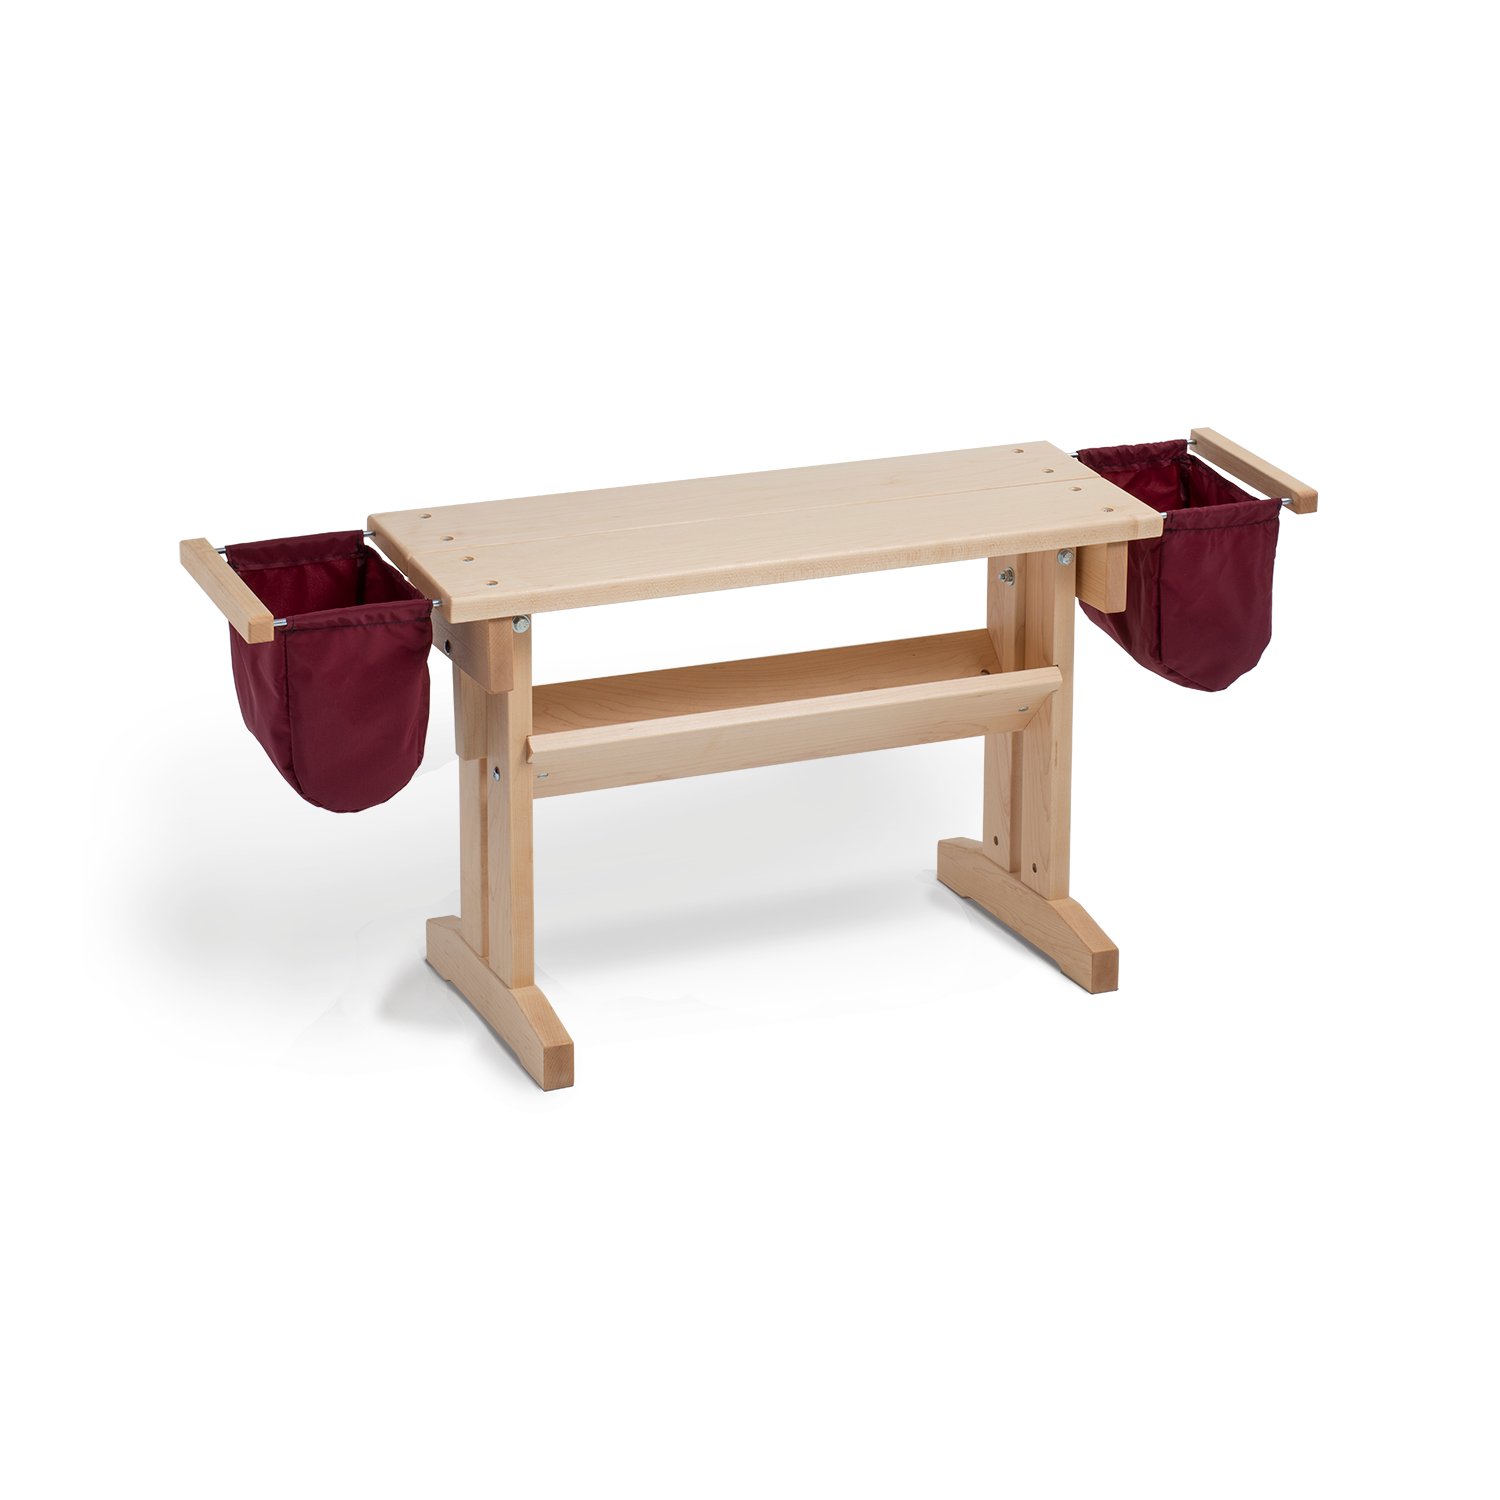 Loom Bench and Bench Bags, maple